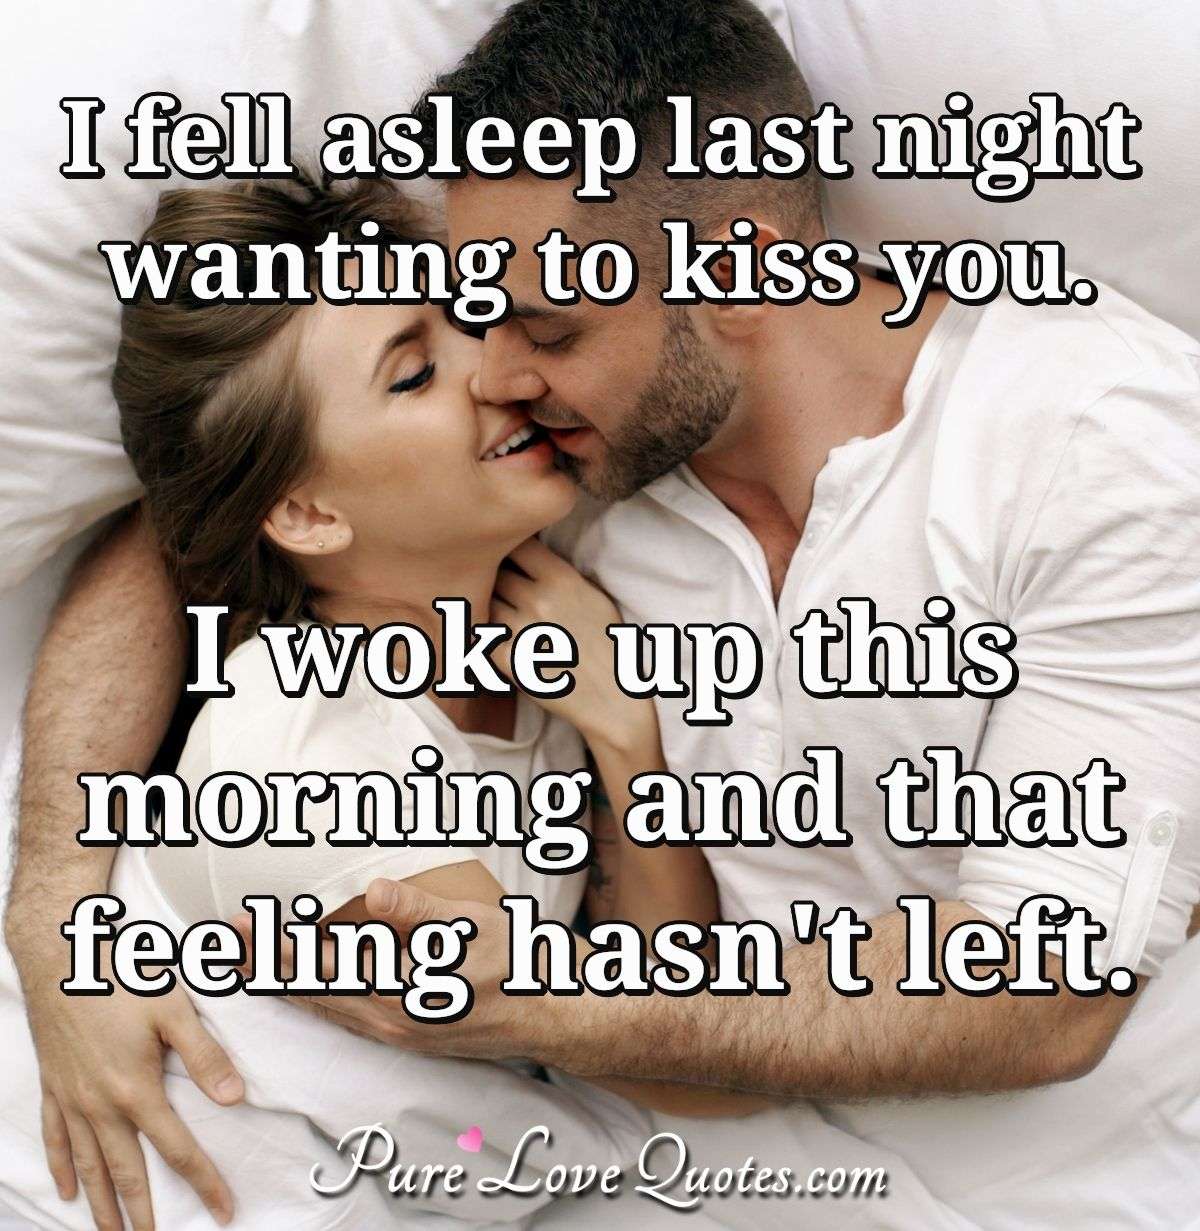 I fell asleep last night wanting to kiss you. I woke up this morning and that feeling hasn't left. - Anonymous